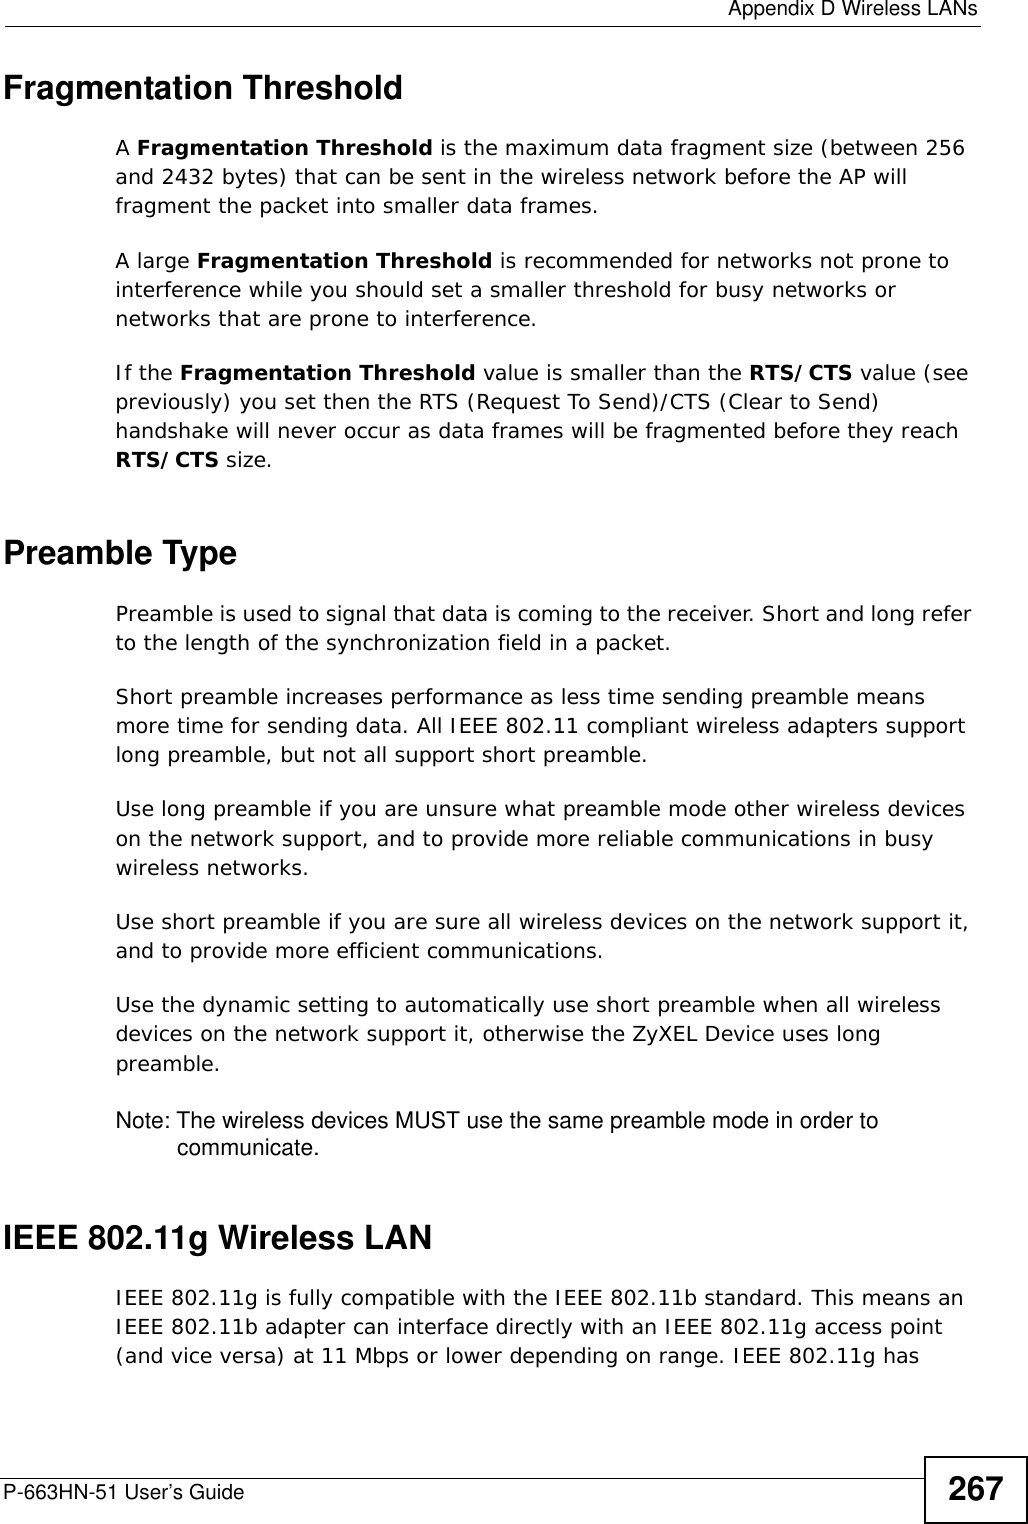  Appendix D Wireless LANsP-663HN-51 User’s Guide 267Fragmentation ThresholdA Fragmentation Threshold is the maximum data fragment size (between 256 and 2432 bytes) that can be sent in the wireless network before the AP will fragment the packet into smaller data frames.A large Fragmentation Threshold is recommended for networks not prone to interference while you should set a smaller threshold for busy networks or networks that are prone to interference.If the Fragmentation Threshold value is smaller than the RTS/CTS value (see previously) you set then the RTS (Request To Send)/CTS (Clear to Send) handshake will never occur as data frames will be fragmented before they reach RTS/CTS size.Preamble TypePreamble is used to signal that data is coming to the receiver. Short and long refer to the length of the synchronization field in a packet.Short preamble increases performance as less time sending preamble means more time for sending data. All IEEE 802.11 compliant wireless adapters support long preamble, but not all support short preamble. Use long preamble if you are unsure what preamble mode other wireless devices on the network support, and to provide more reliable communications in busy wireless networks. Use short preamble if you are sure all wireless devices on the network support it, and to provide more efficient communications.Use the dynamic setting to automatically use short preamble when all wireless devices on the network support it, otherwise the ZyXEL Device uses long preamble.Note: The wireless devices MUST use the same preamble mode in order to communicate.IEEE 802.11g Wireless LANIEEE 802.11g is fully compatible with the IEEE 802.11b standard. This means an IEEE 802.11b adapter can interface directly with an IEEE 802.11g access point (and vice versa) at 11 Mbps or lower depending on range. IEEE 802.11g has 